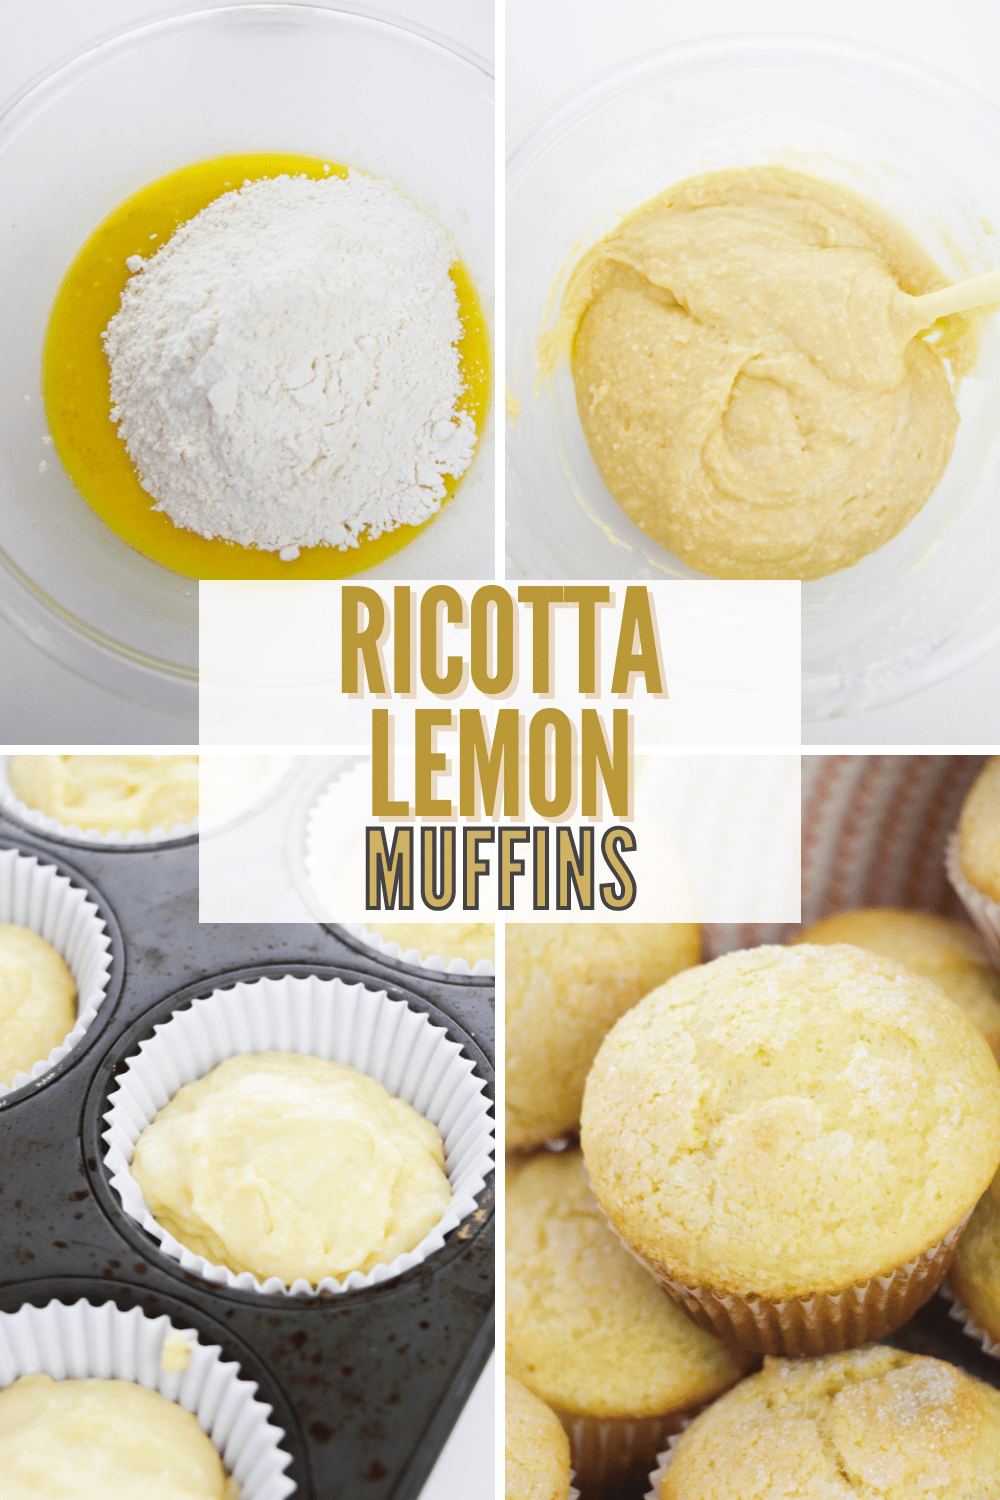 These Ricotta Lemon Muffins are super moist, fluffy, and packed with flavor! They're the perfect way to start off a summer morning. #ricottalemonmuffins #lemonmuffins #breakfastmuffins #recipe via @wondermomwannab